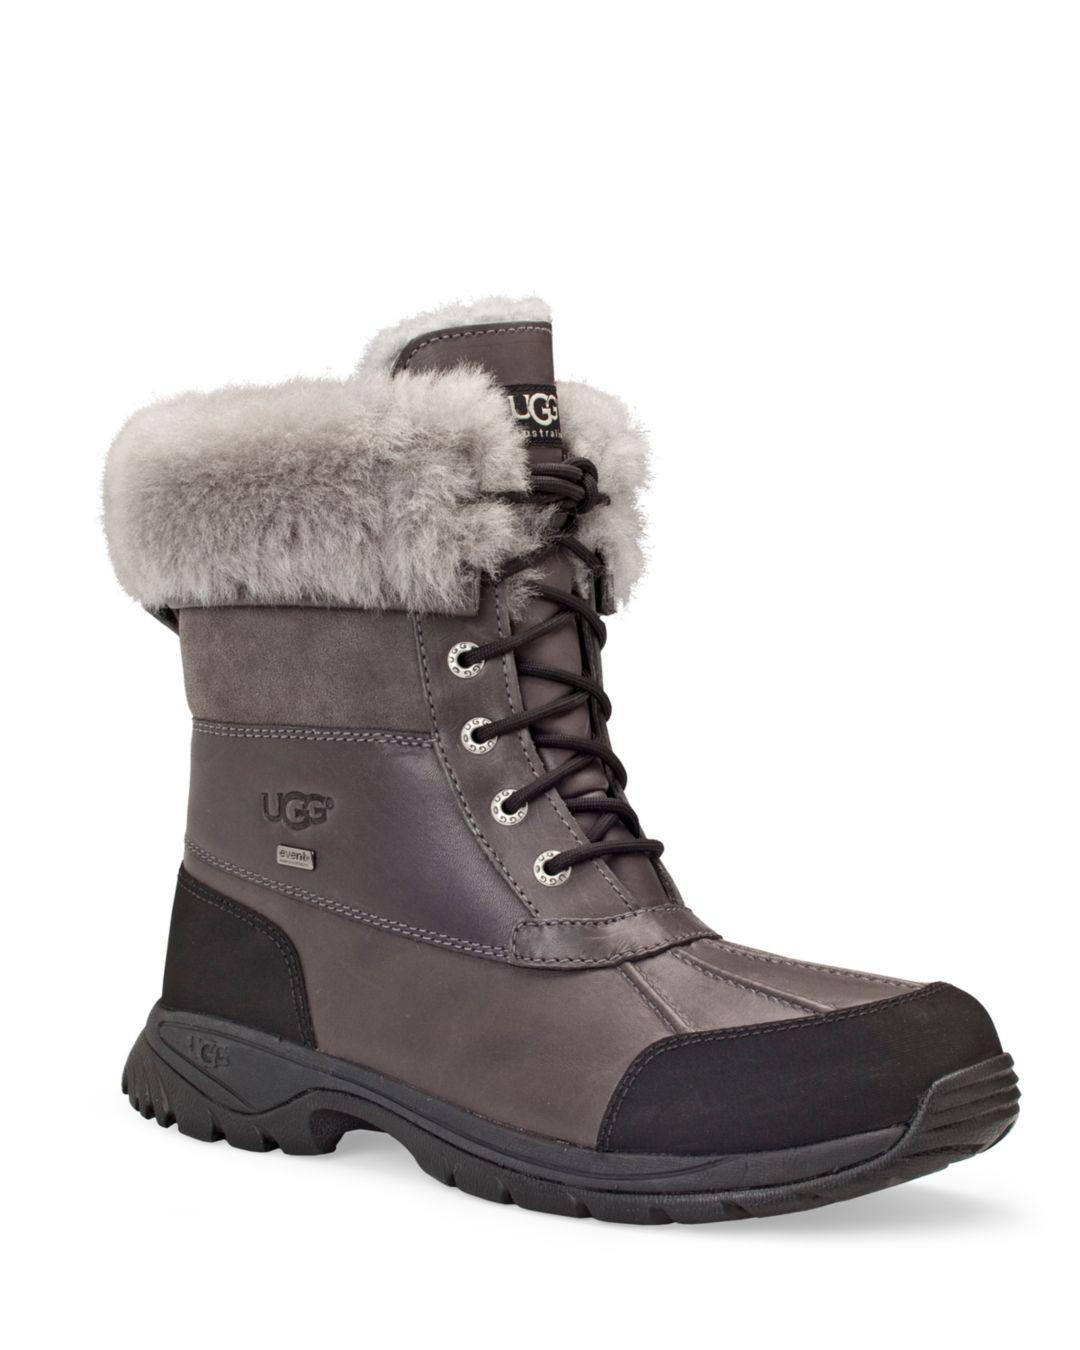 UGG Australia Men's Butte Boots in Metal (Gray) for Men - Save 33% - Lyst